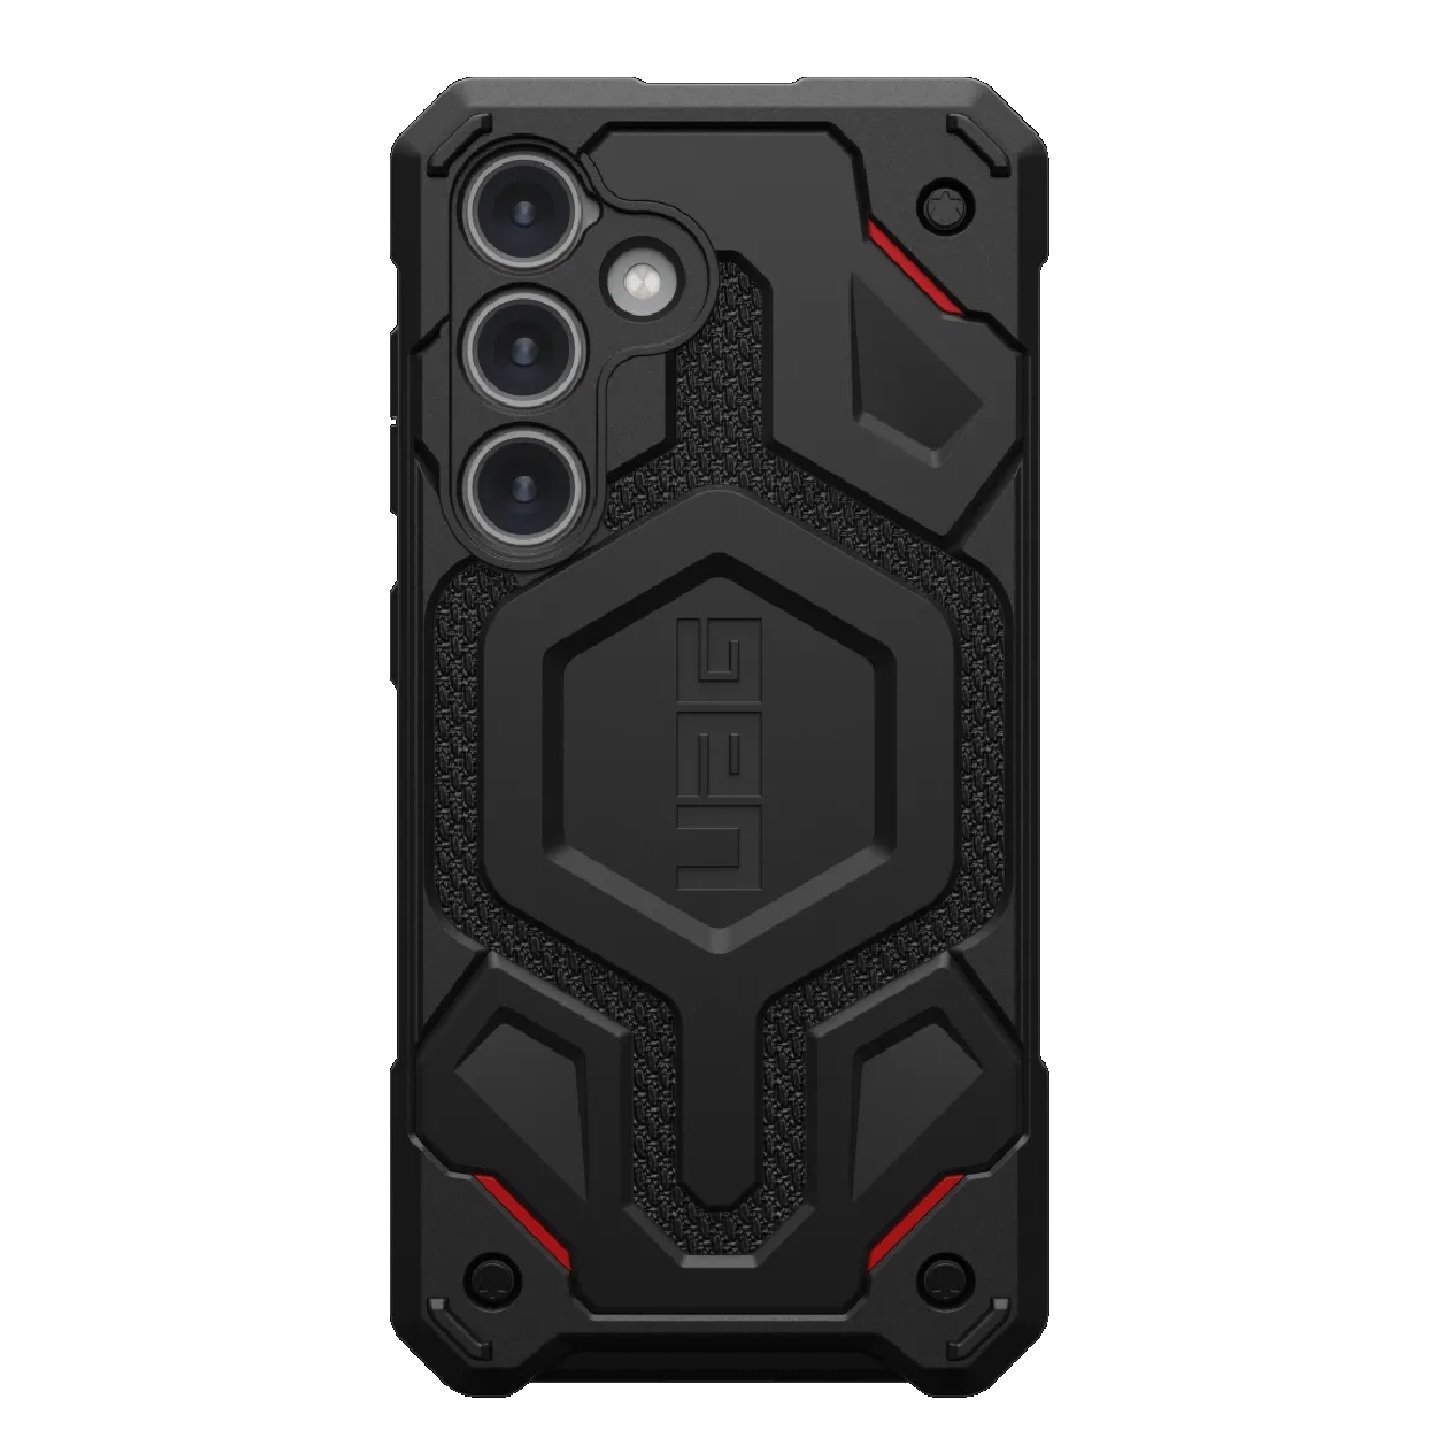 Uag Monarch Kevlar Samsung Galaxy S24 5G (6.2') Case - Black (214411113940), 25 FT. Drop Protection (7.6M), Multiple Layers, Tactical Grip, Rugged